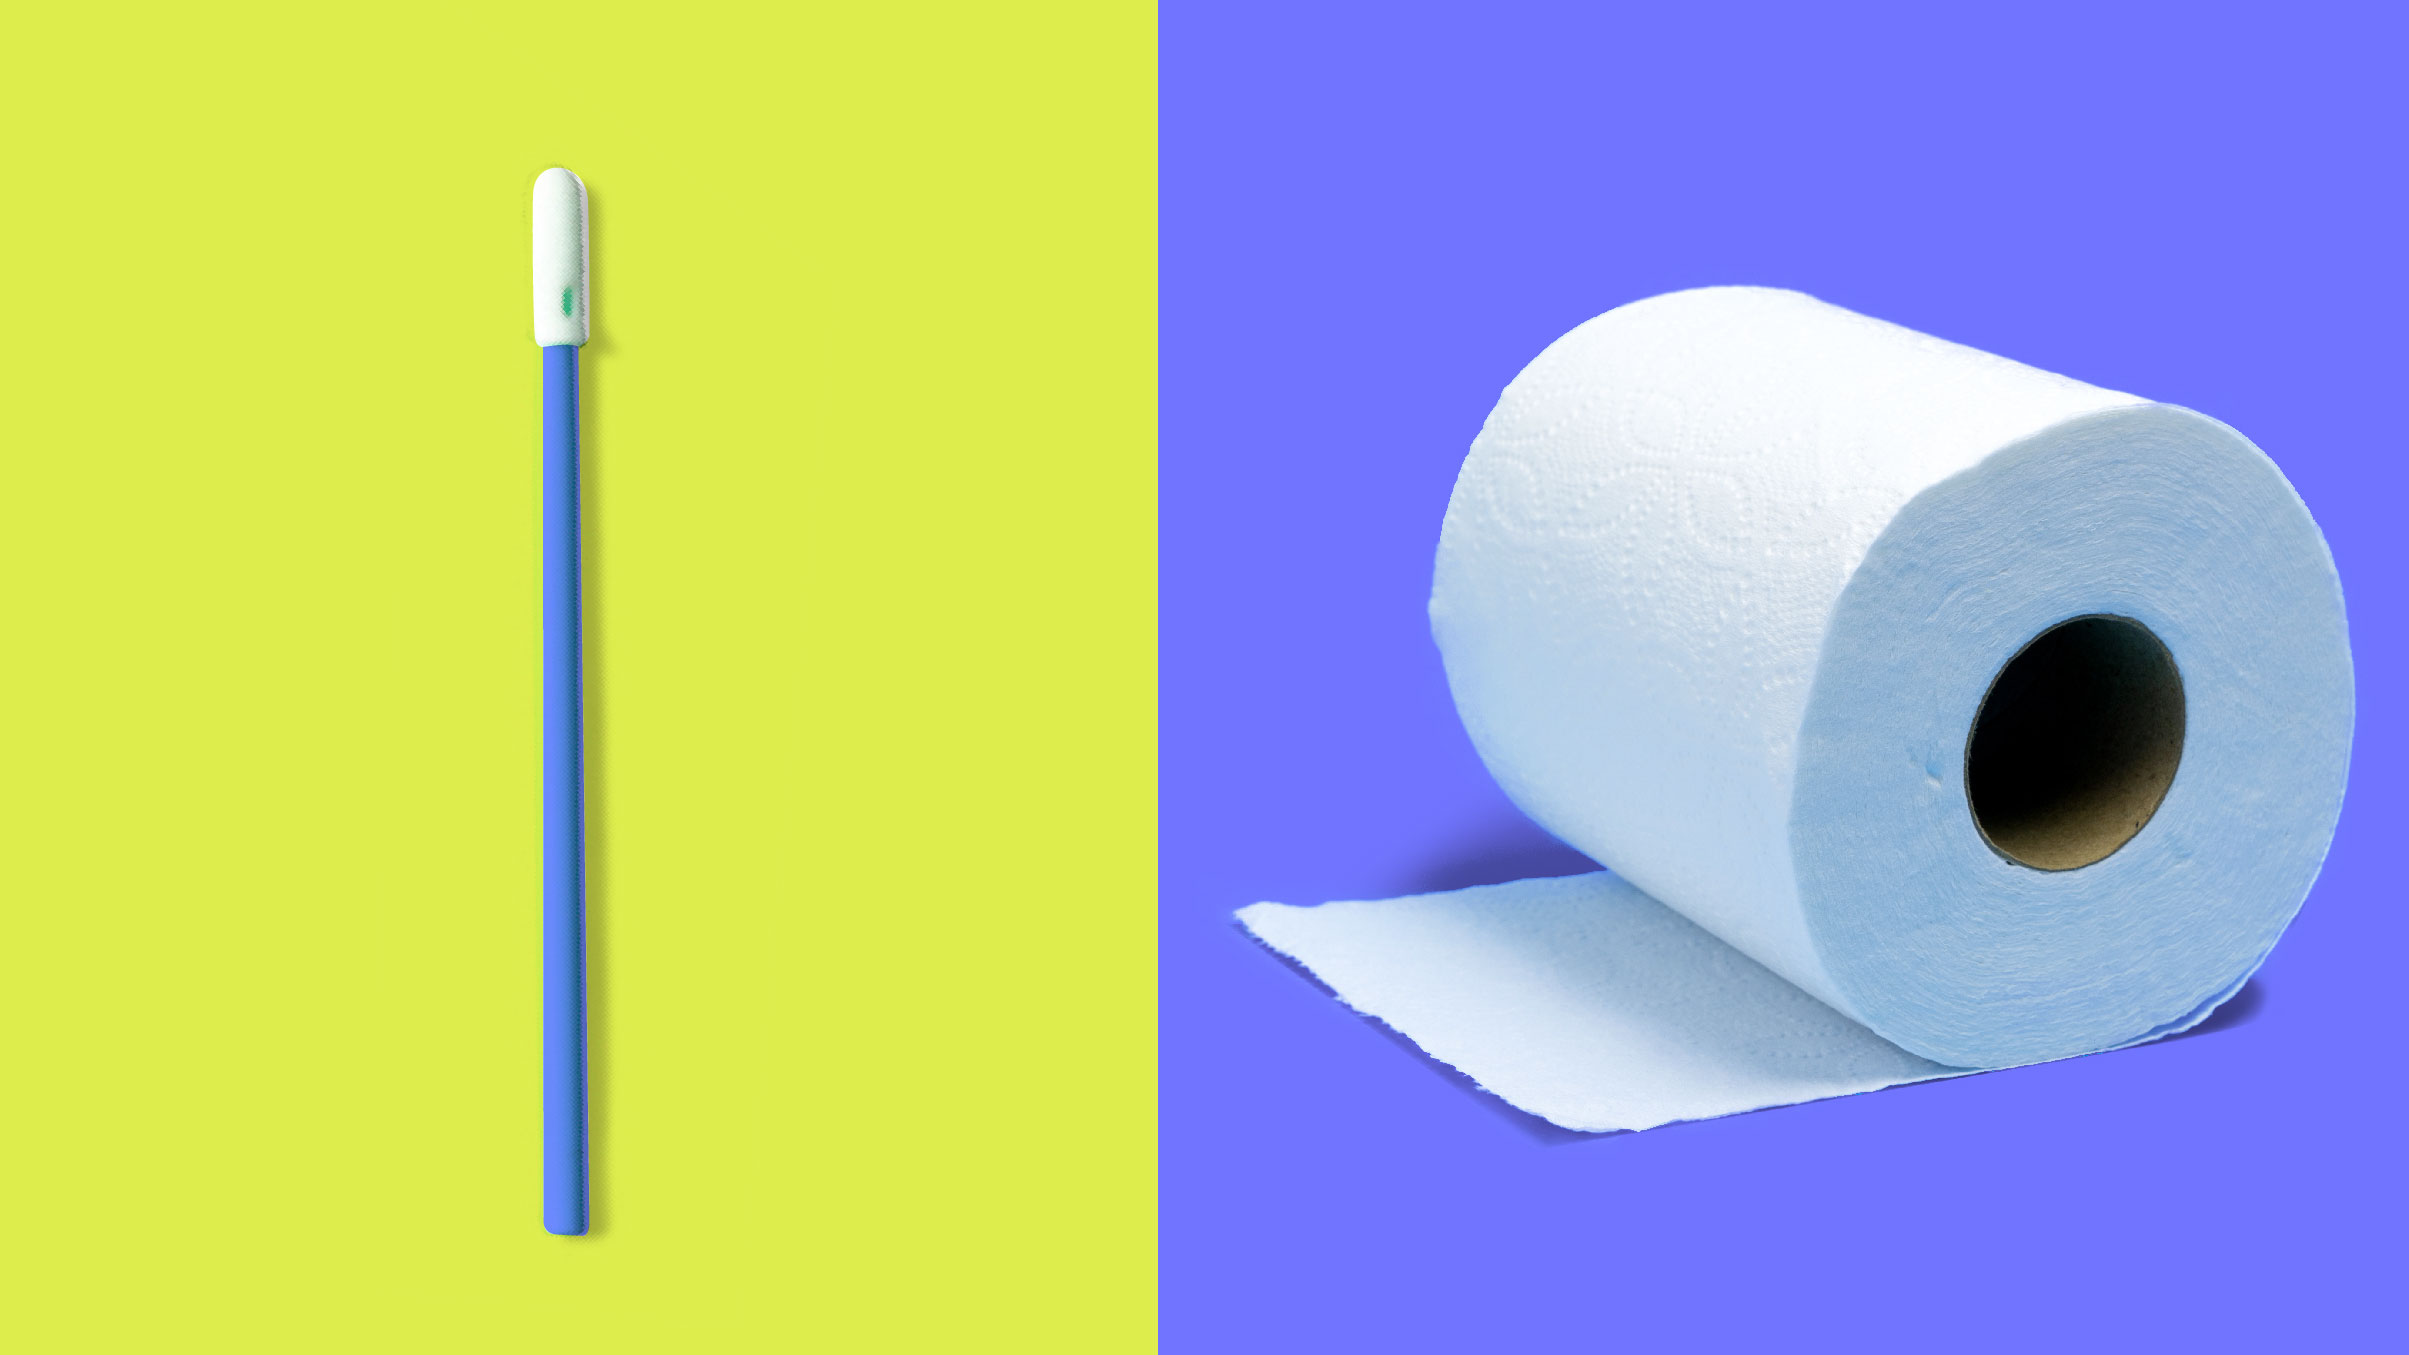 A nasal swab side-by-side with a roll of toilet paper.